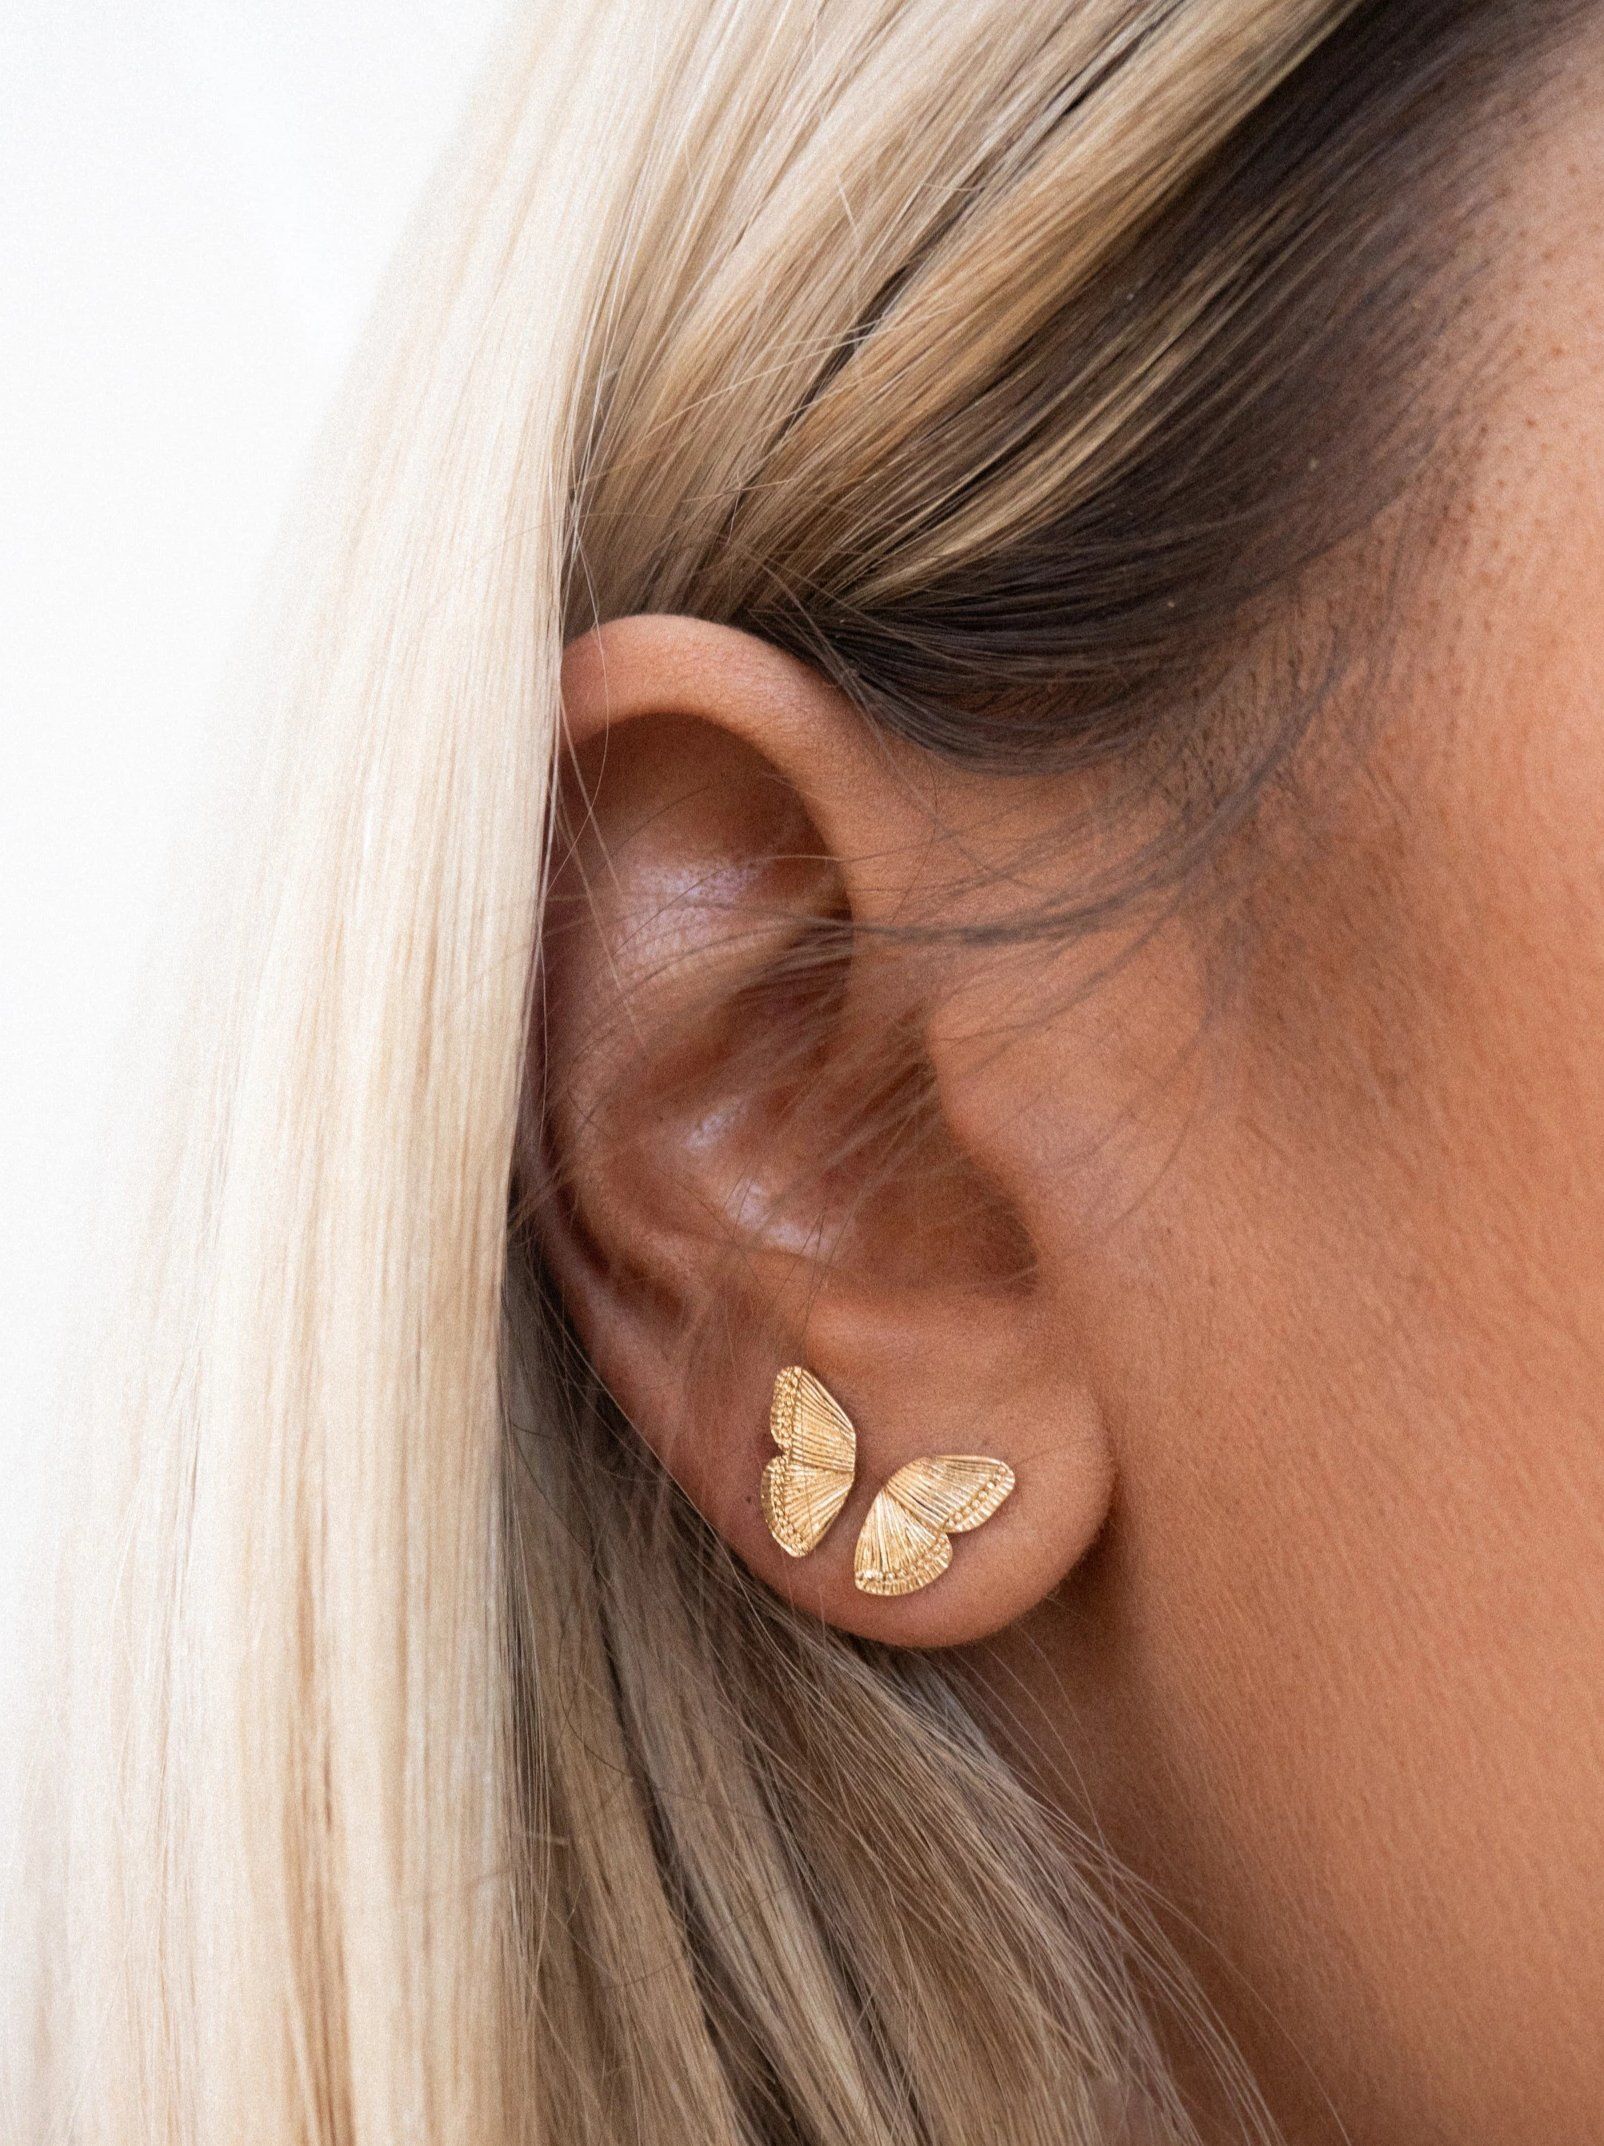 Butterfly earrings – Just what you need to spice up your outfit